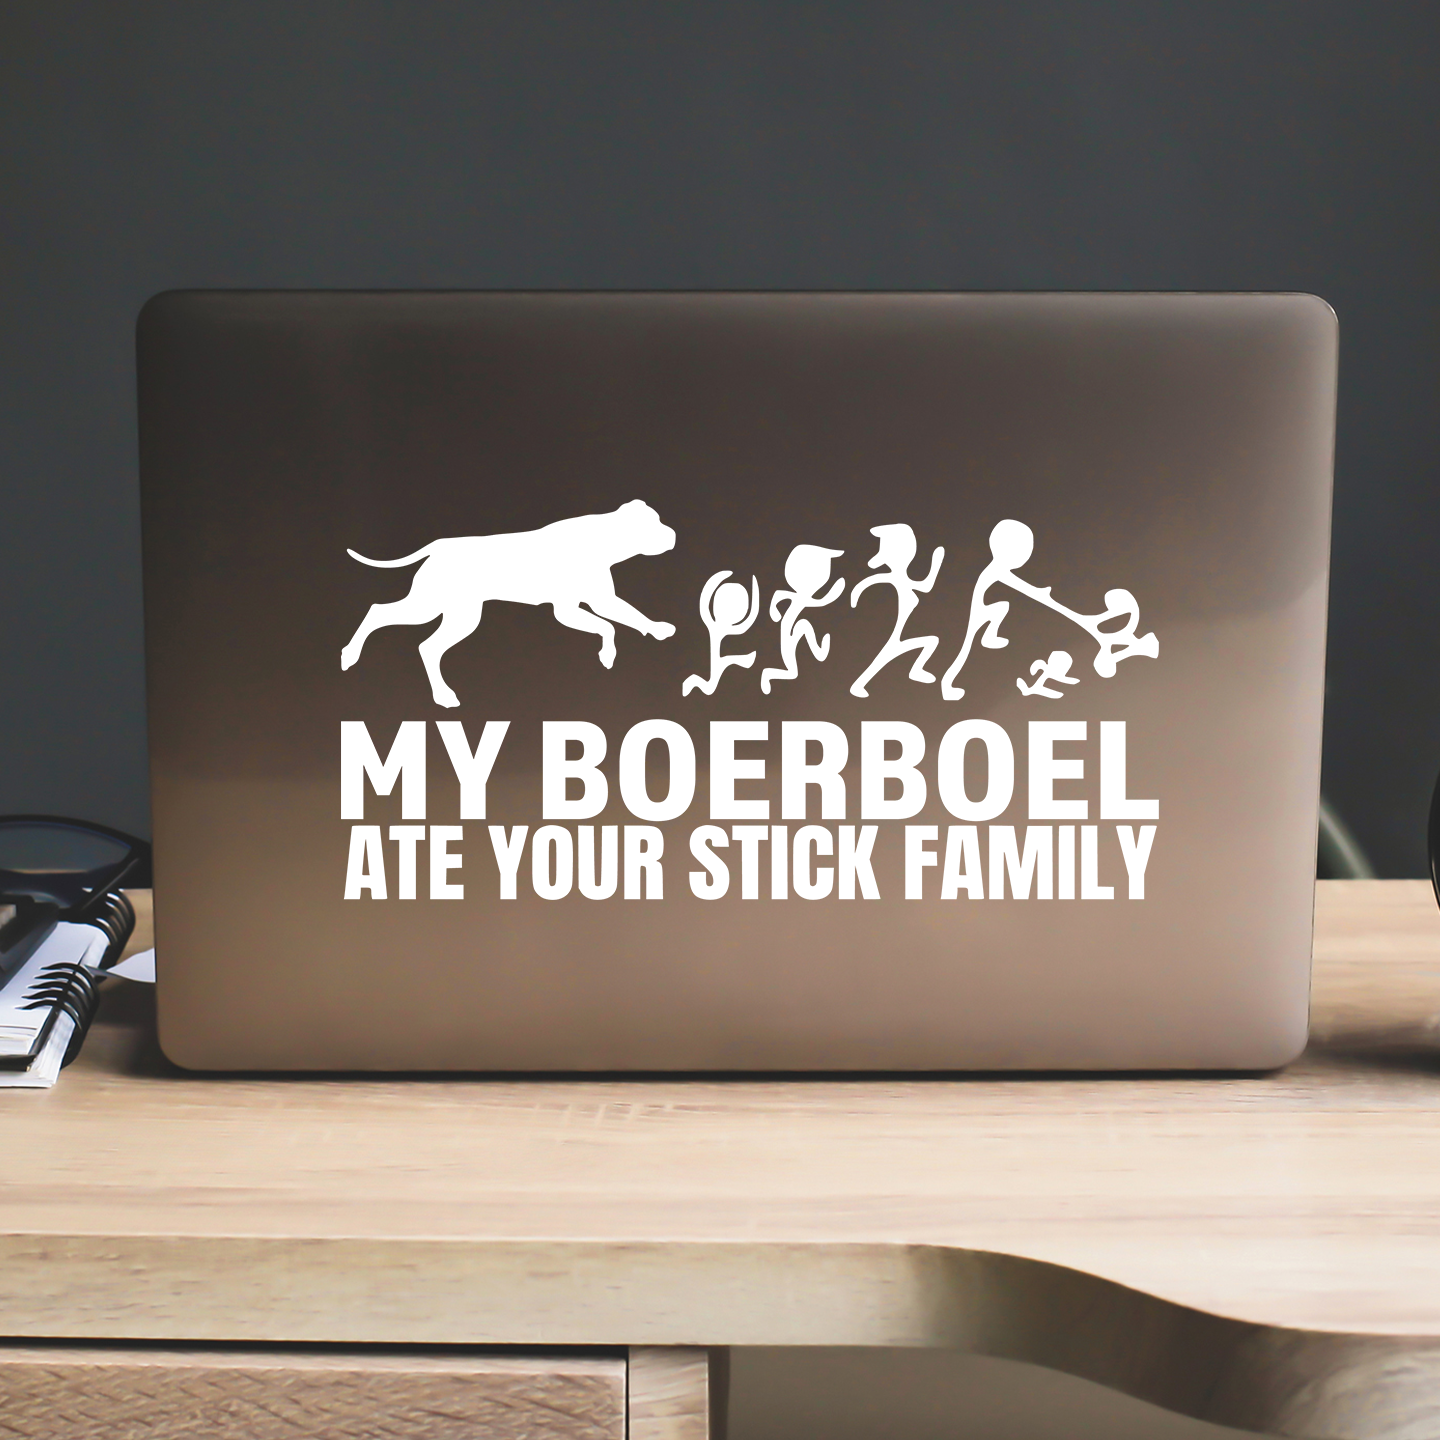 My Boerboel Ate Your Stick Family Sticker